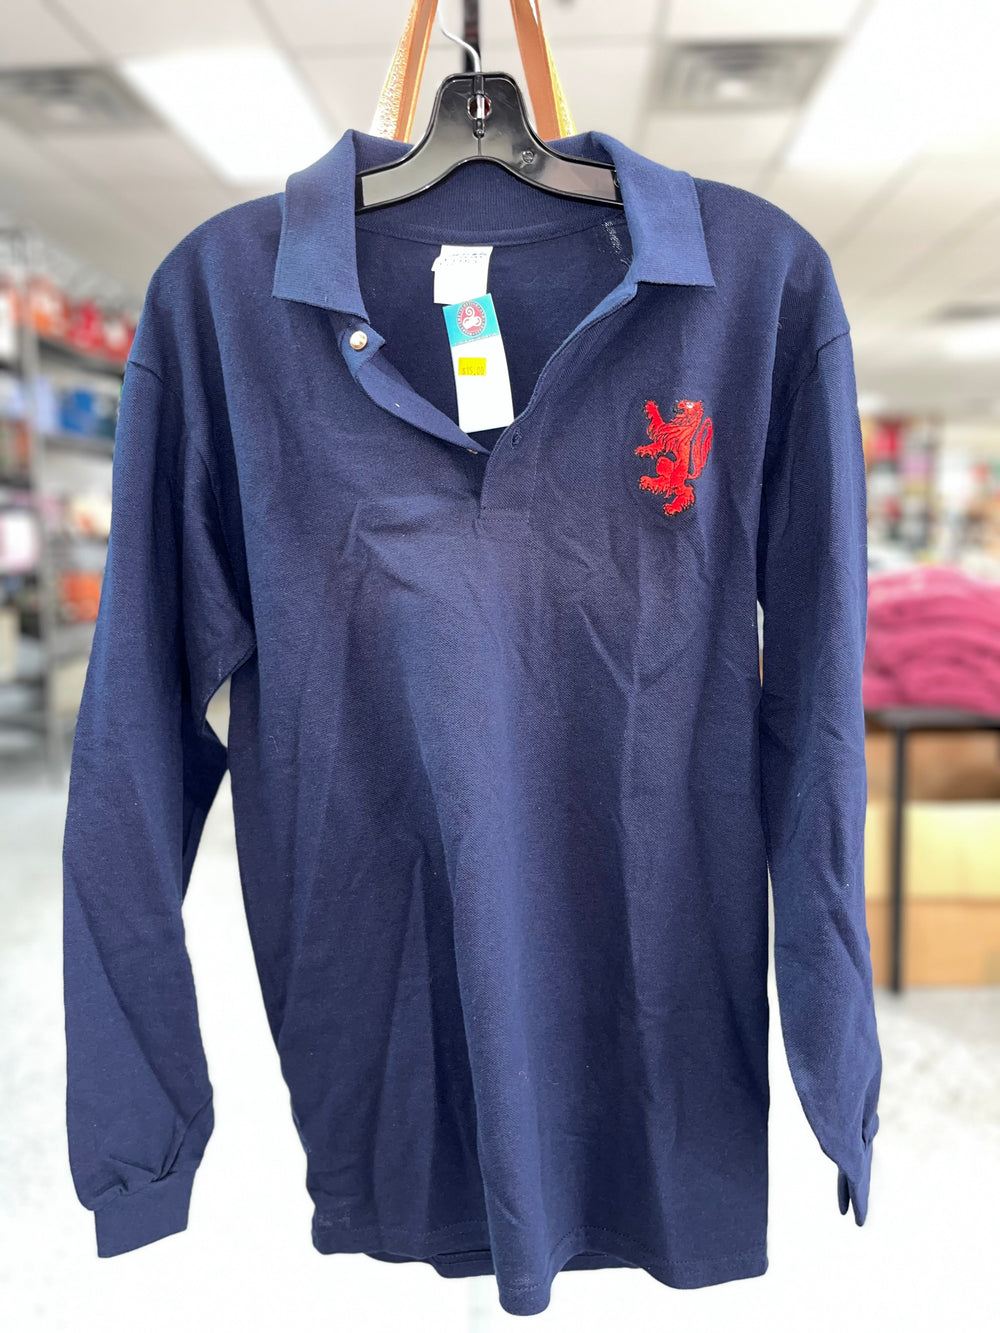 Long Sleeve Collared Shirt with Red Lion